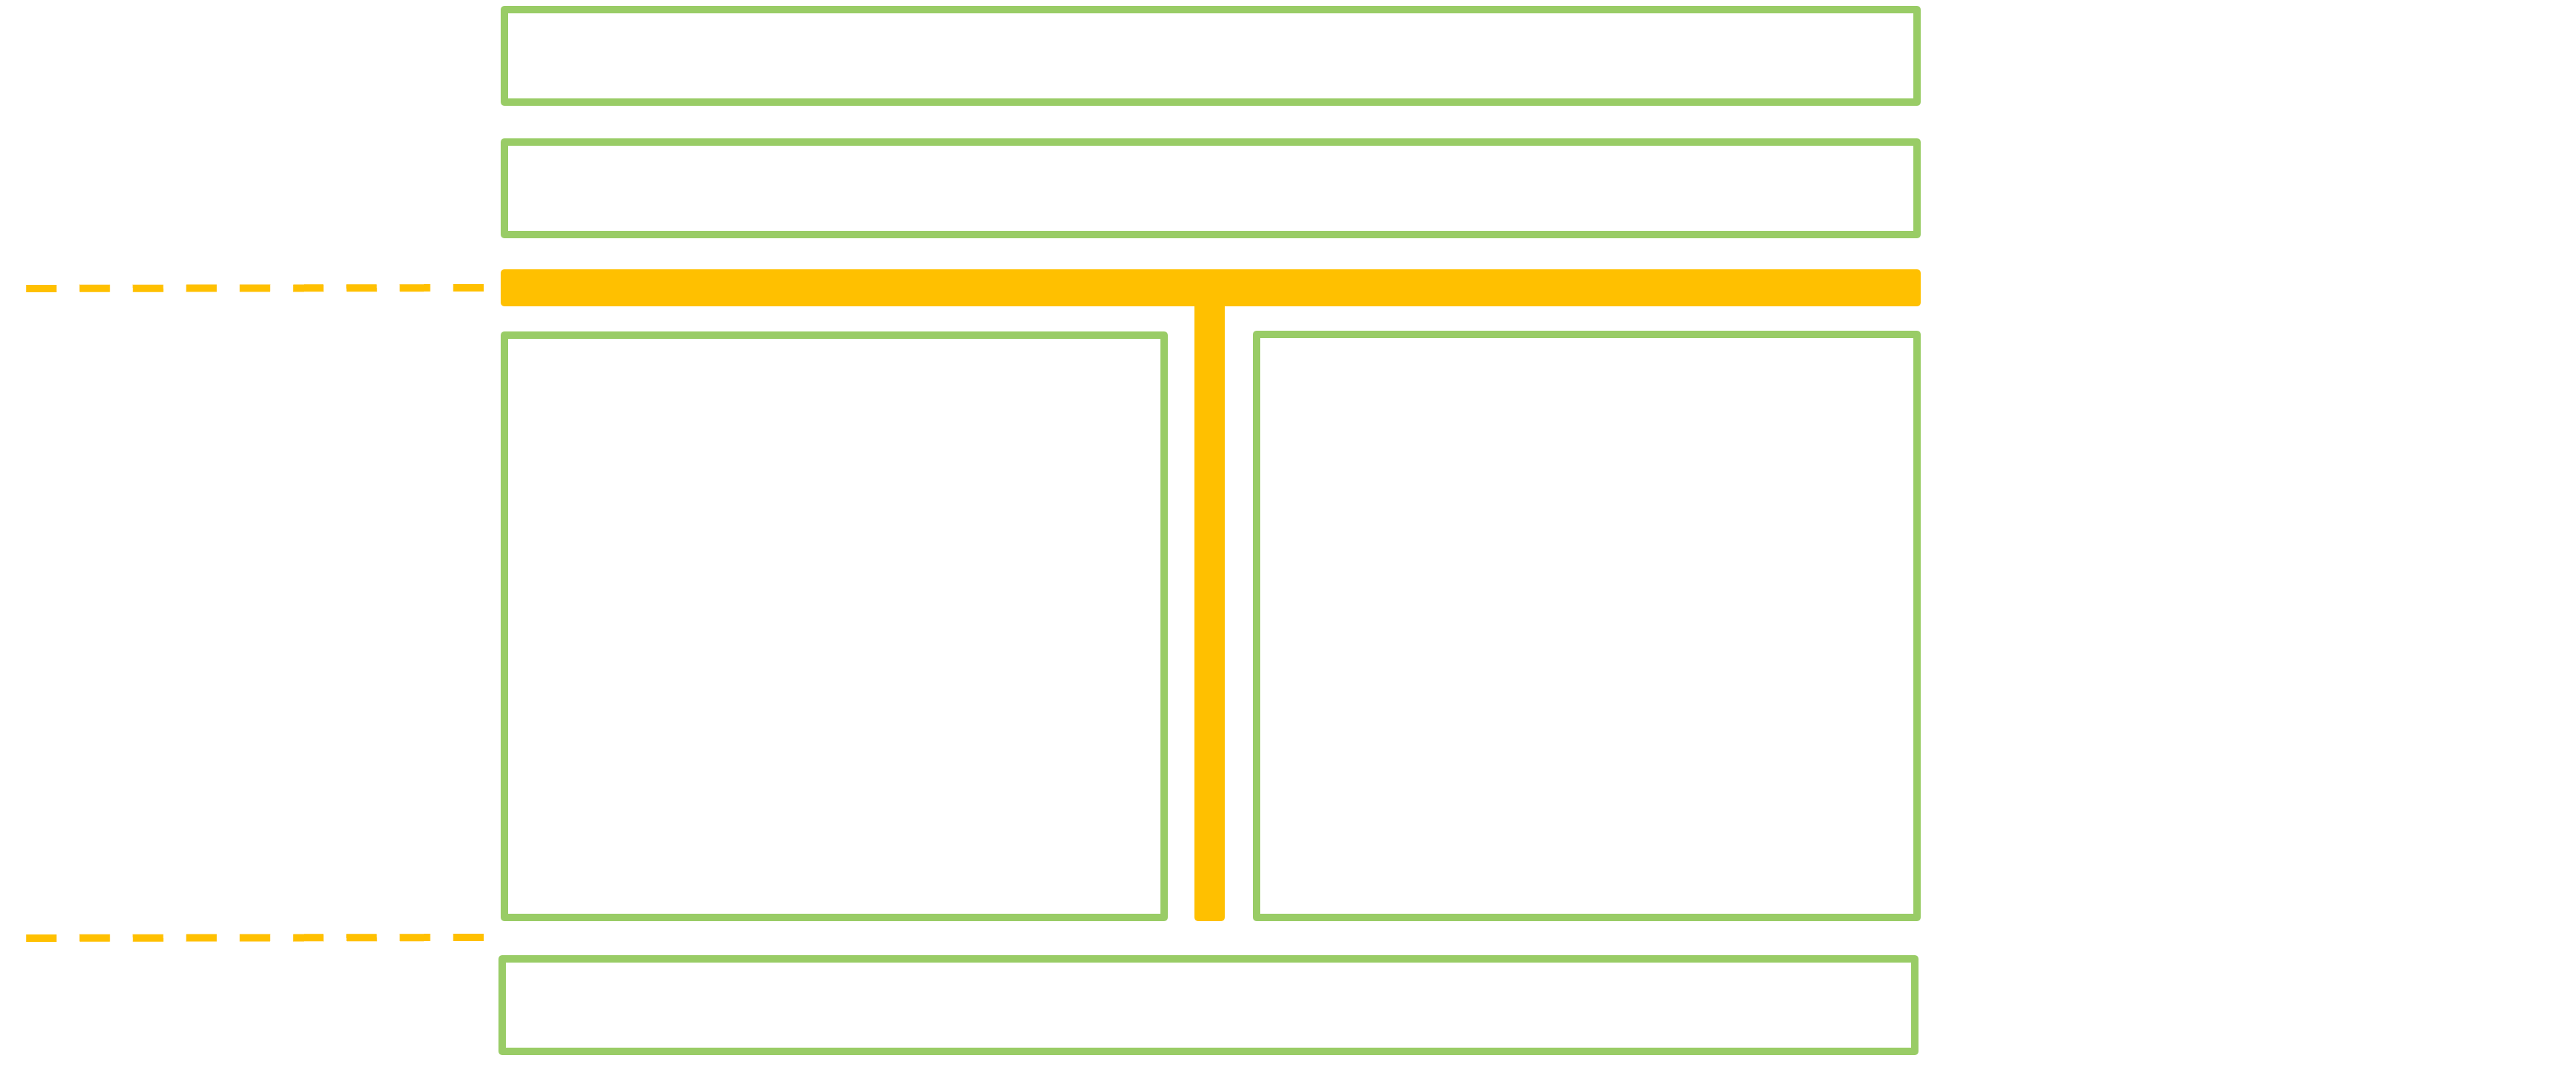 A simple architectural view of Android